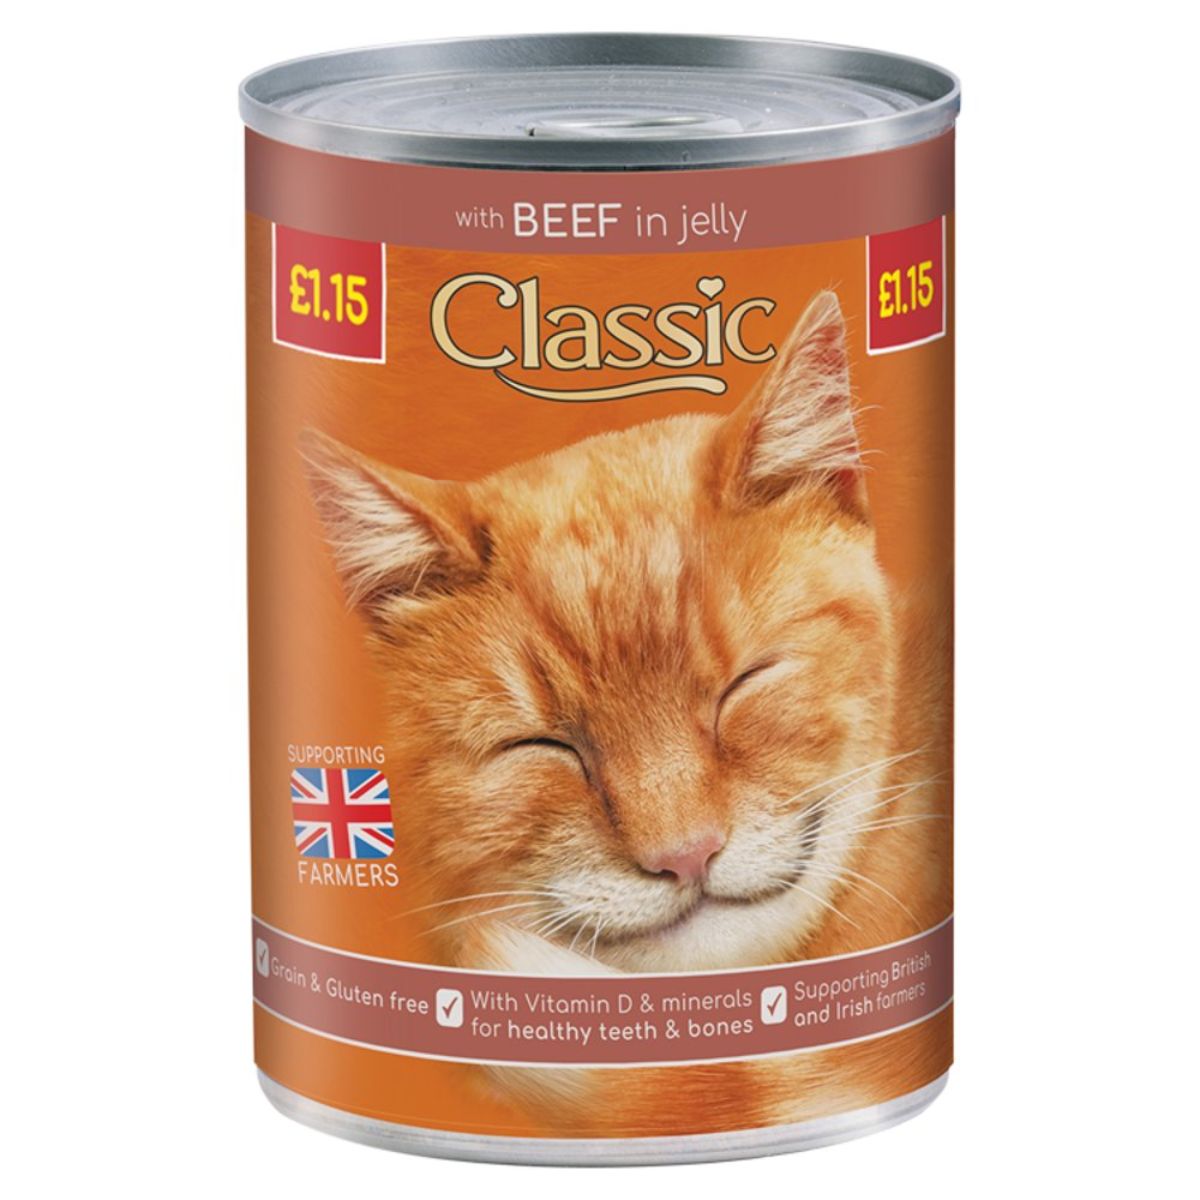 A can of Classic - Beef in Jelly - 400g cat food with a picture of a cat.